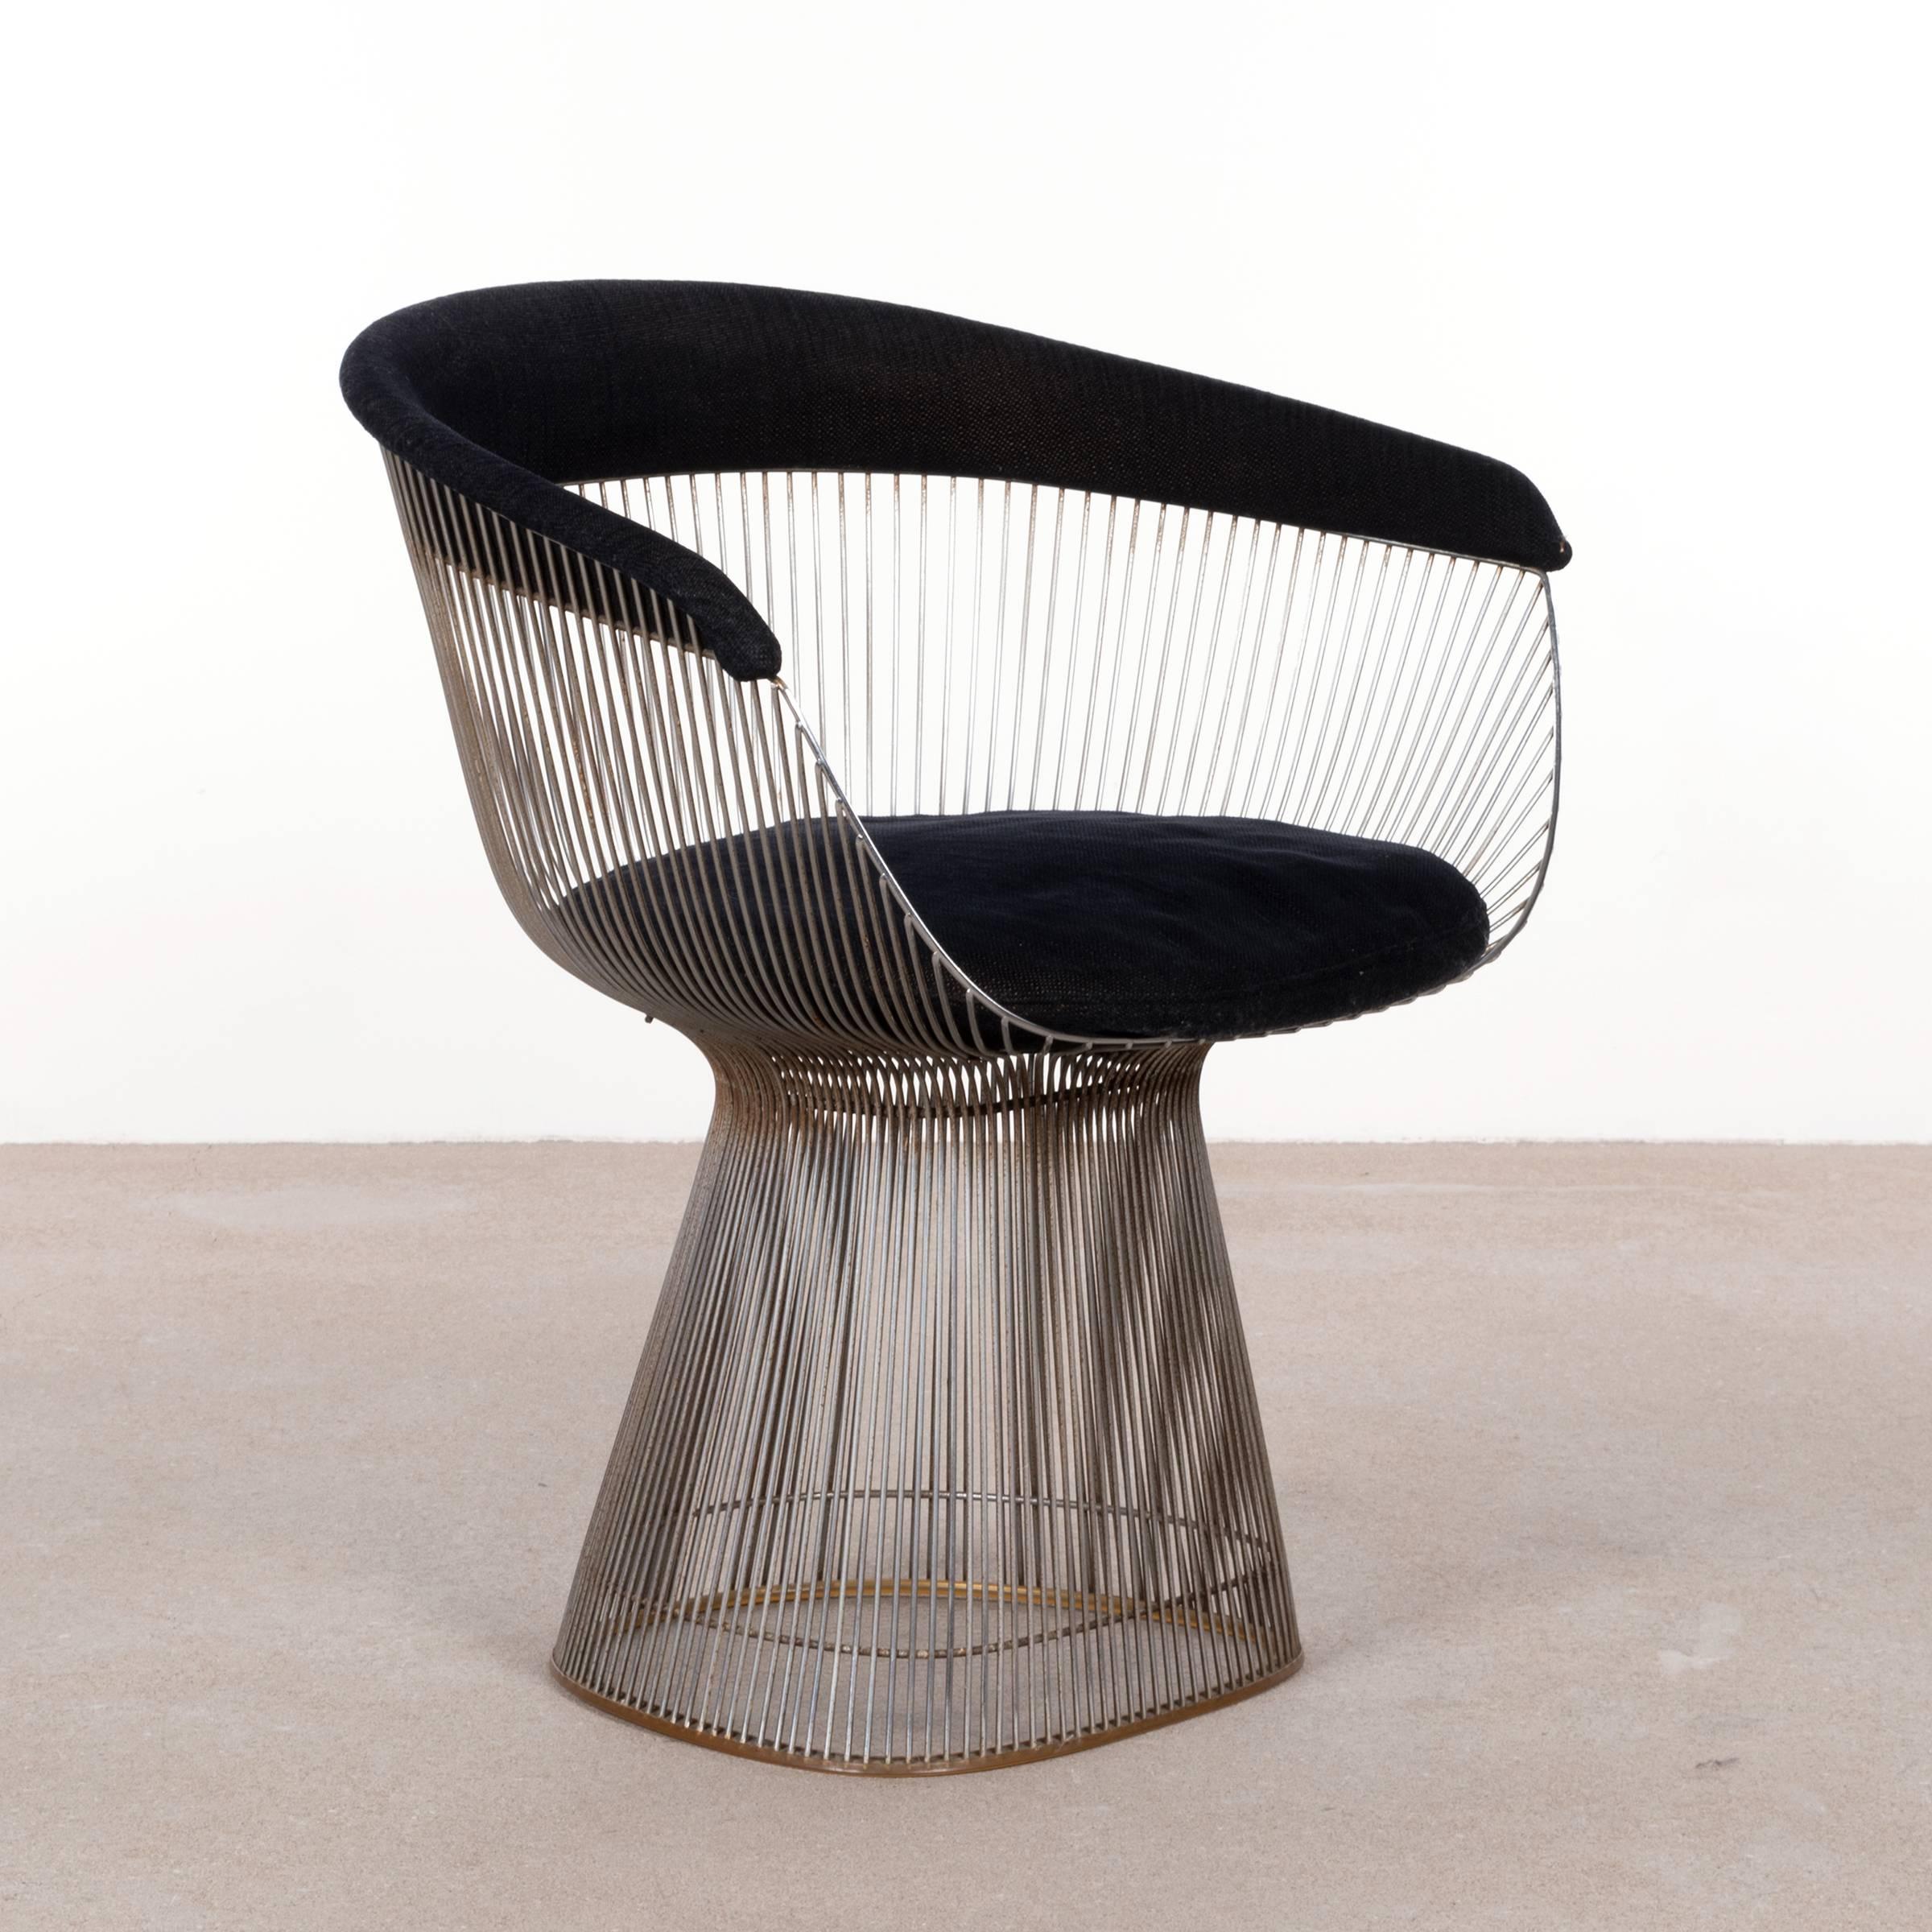 Elegant dining chairs (model 1725A) designed by Warren Platner for Knoll.
Nickel plated steel frames and black fabric in original condition. The chairs need restoration (polishing frames) and reupholstery is recommended, contact us for